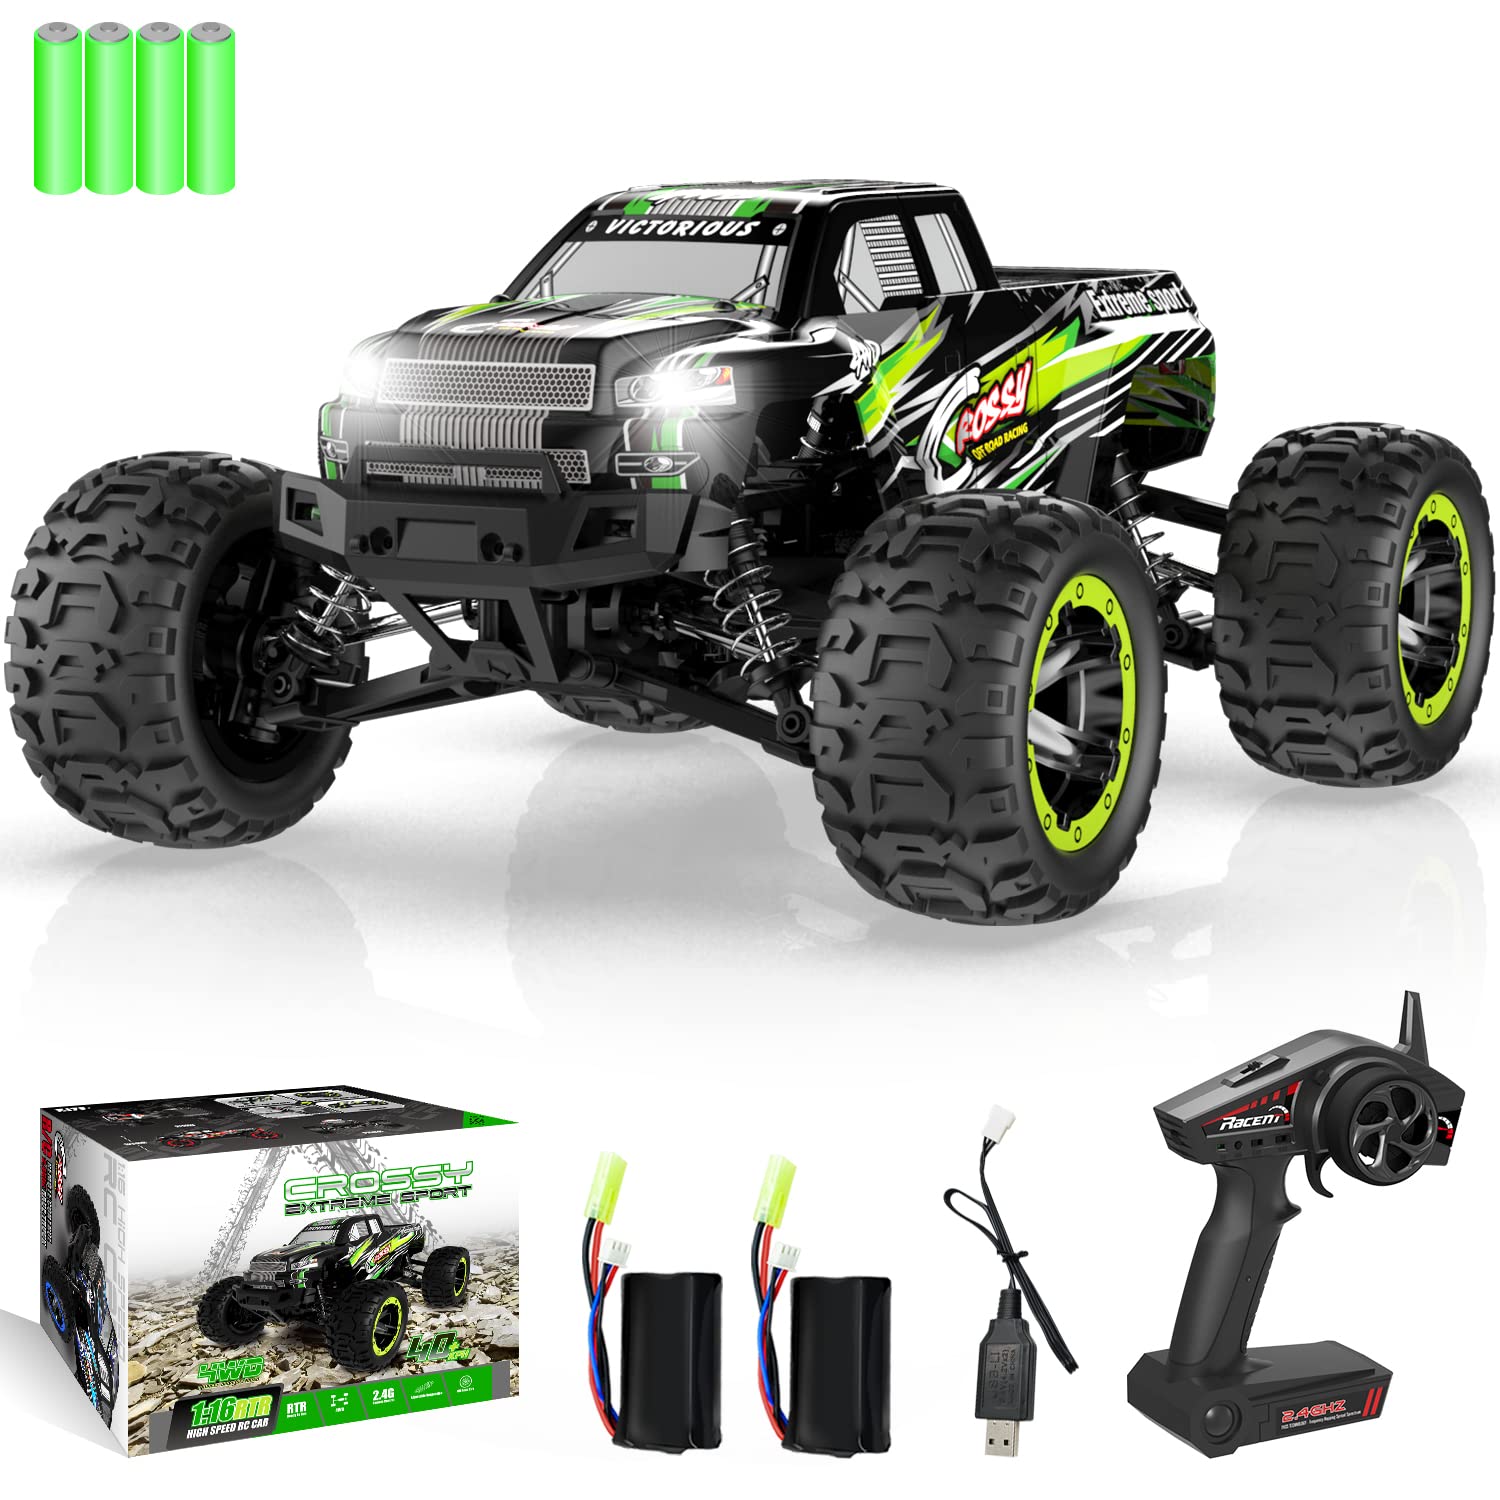 VOLANTEXRC 1:16 Scale RC Car All Terrain RC Truck 30MPH High Speed 4WD RC Monster Truck 2.4 GHz Remote Control Car Waterproof with Two Rechargeable Batteries for Boys Kids and Adults (785-5 Green)